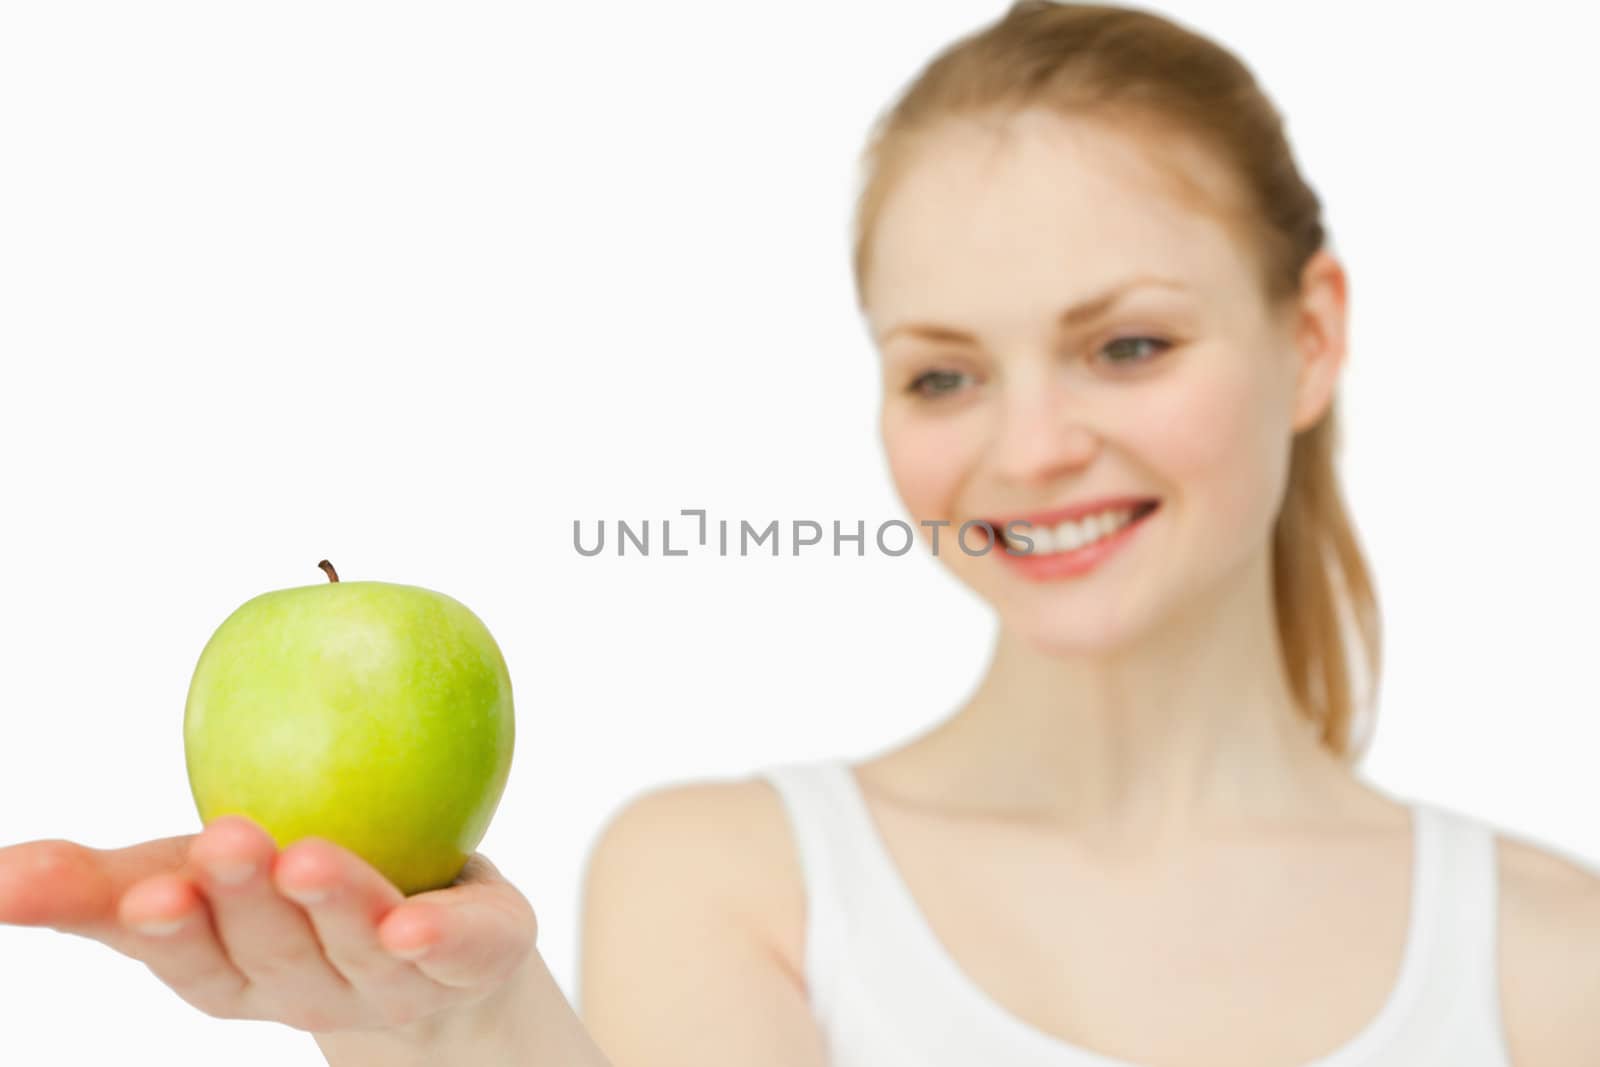 Woman smiling while presenting an apple against white background